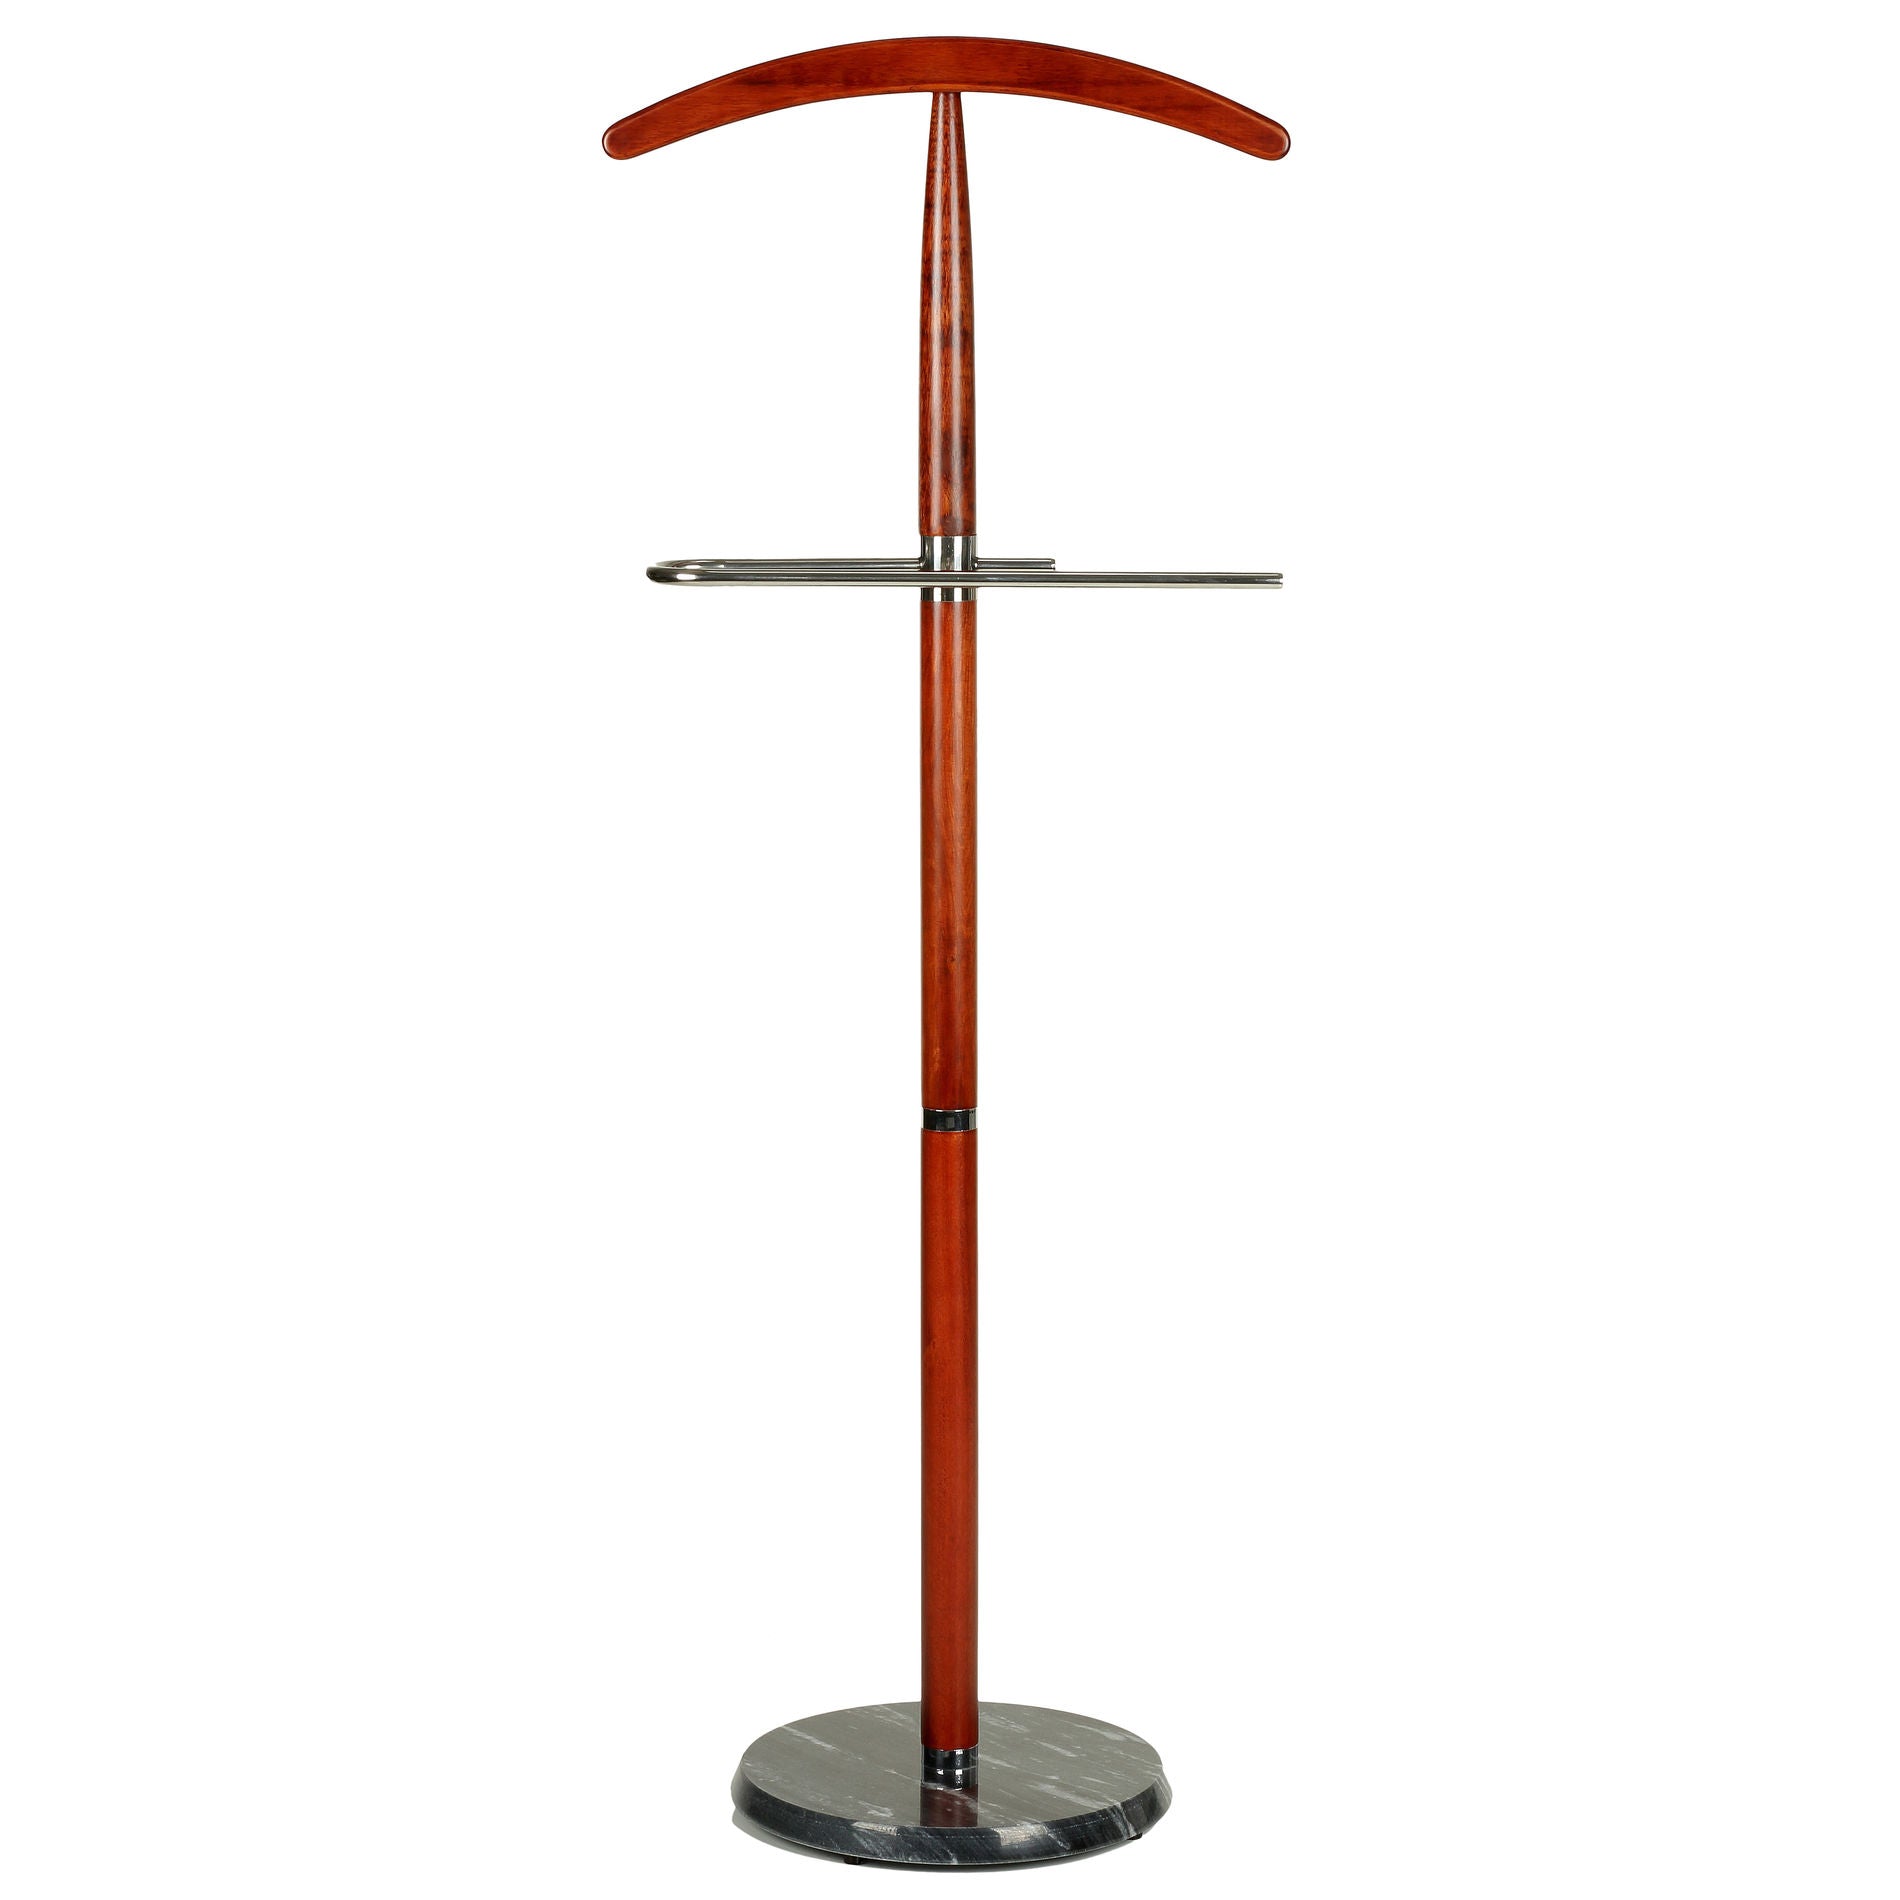 Cortesi Home Cambridge Suit Valet Stand in Cherry Wood with Marble Base